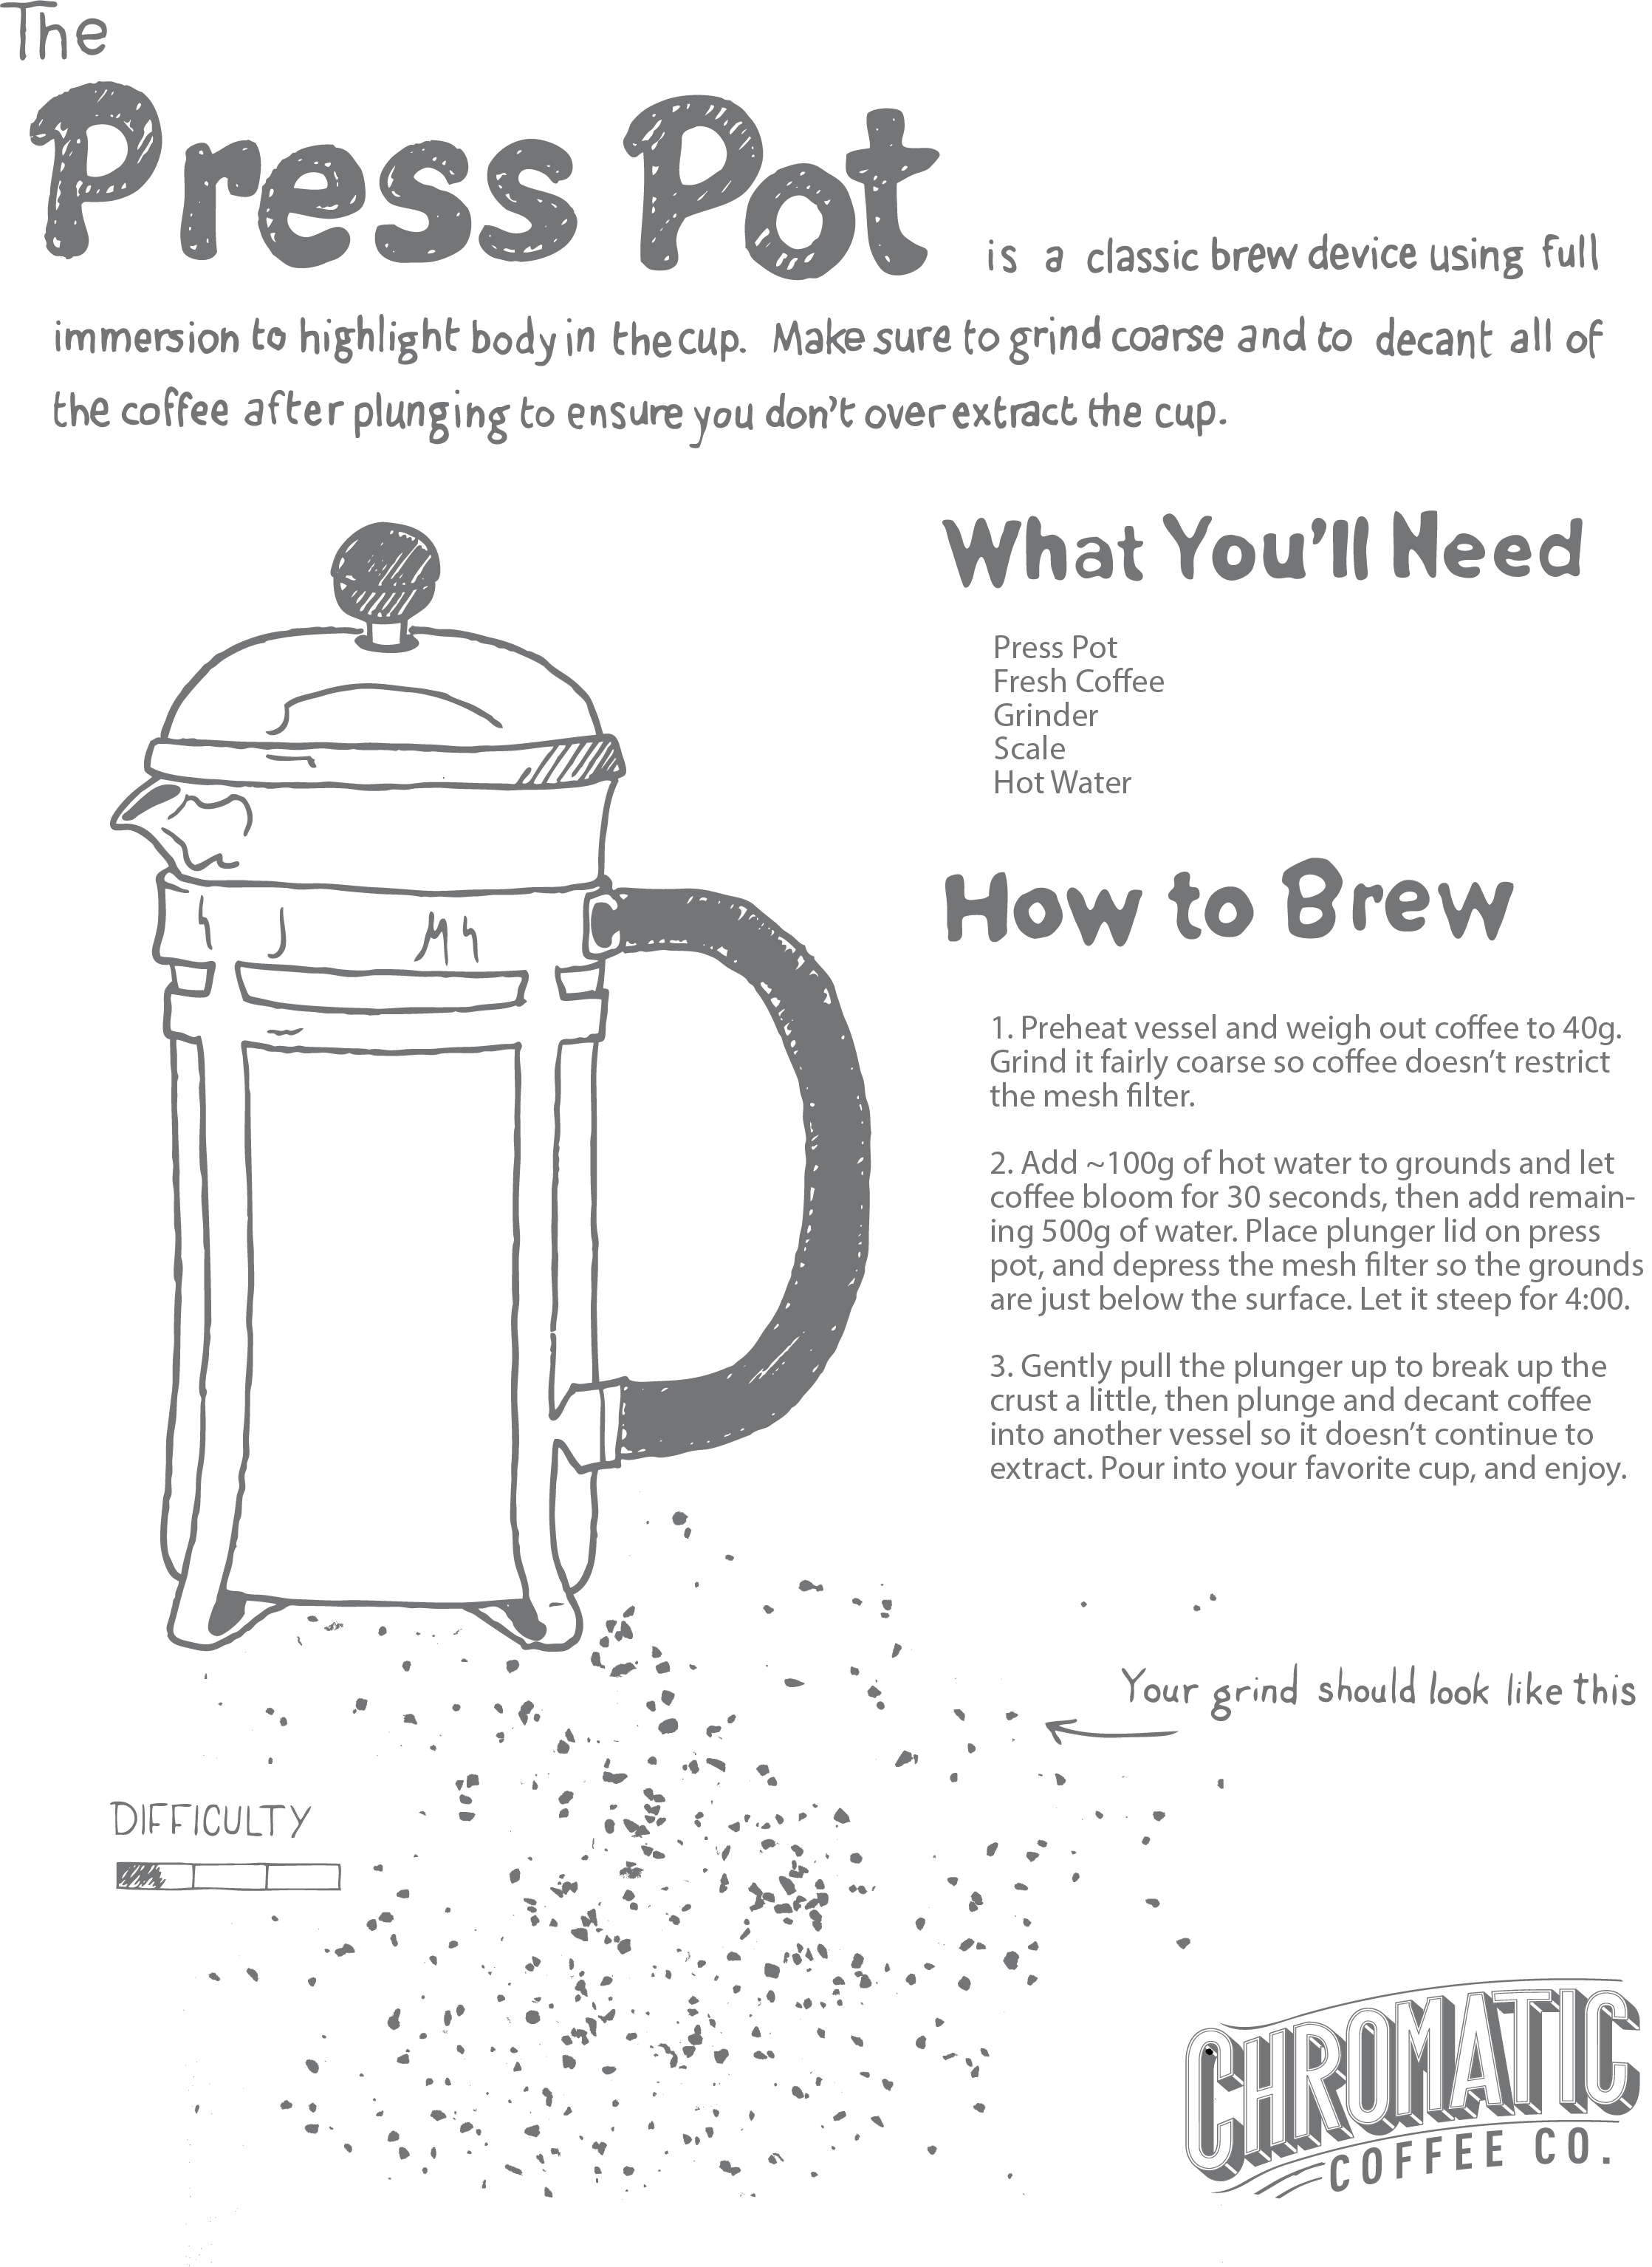 https://www.chromaticcoffee.com/product_images/uploaded_images/press-pot-brew-guide-one-page.png